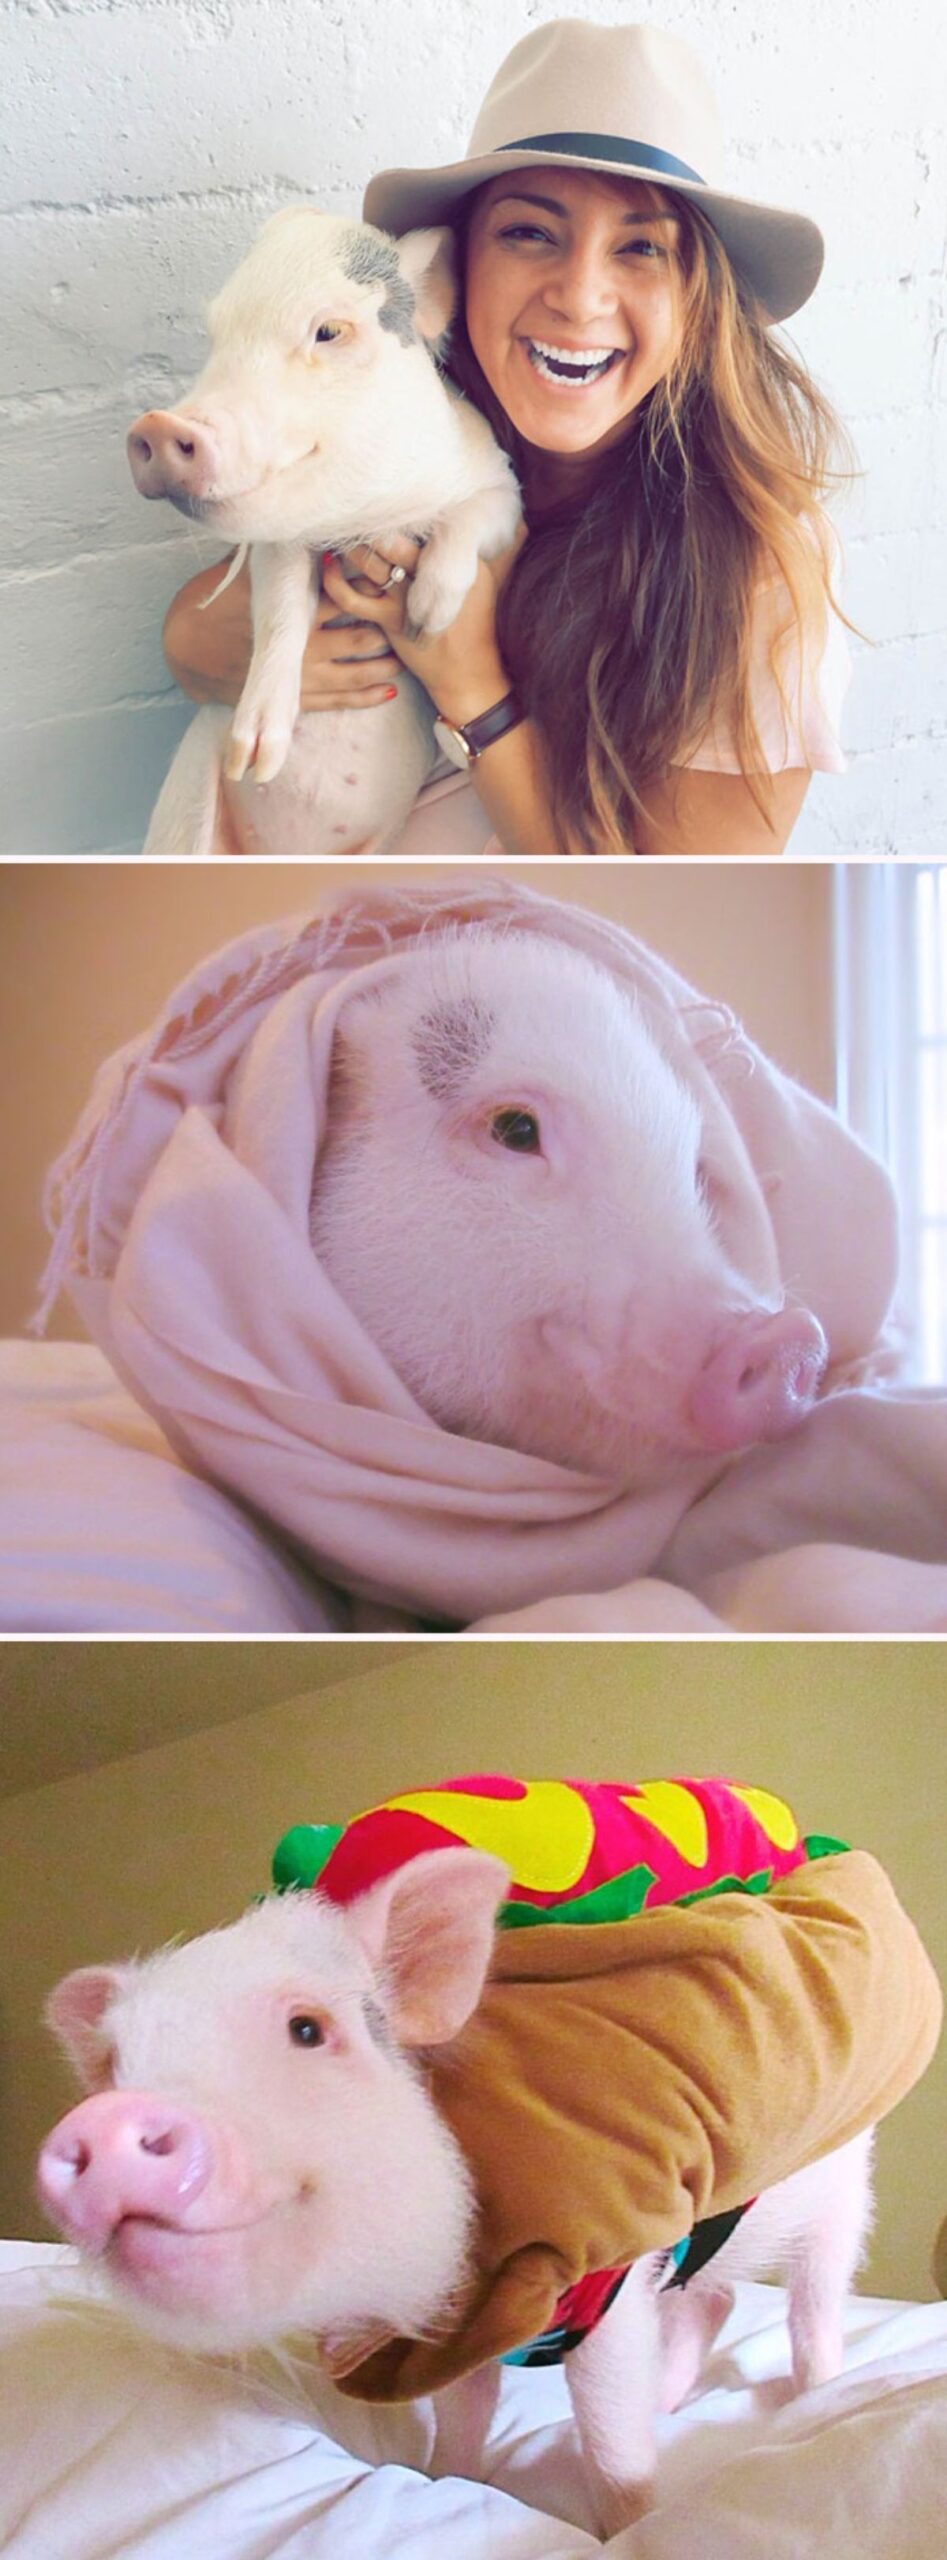 3 photos of a white and black pig being held by a woman, wrapped up in a pink blanket and wearing a hotdog outfit